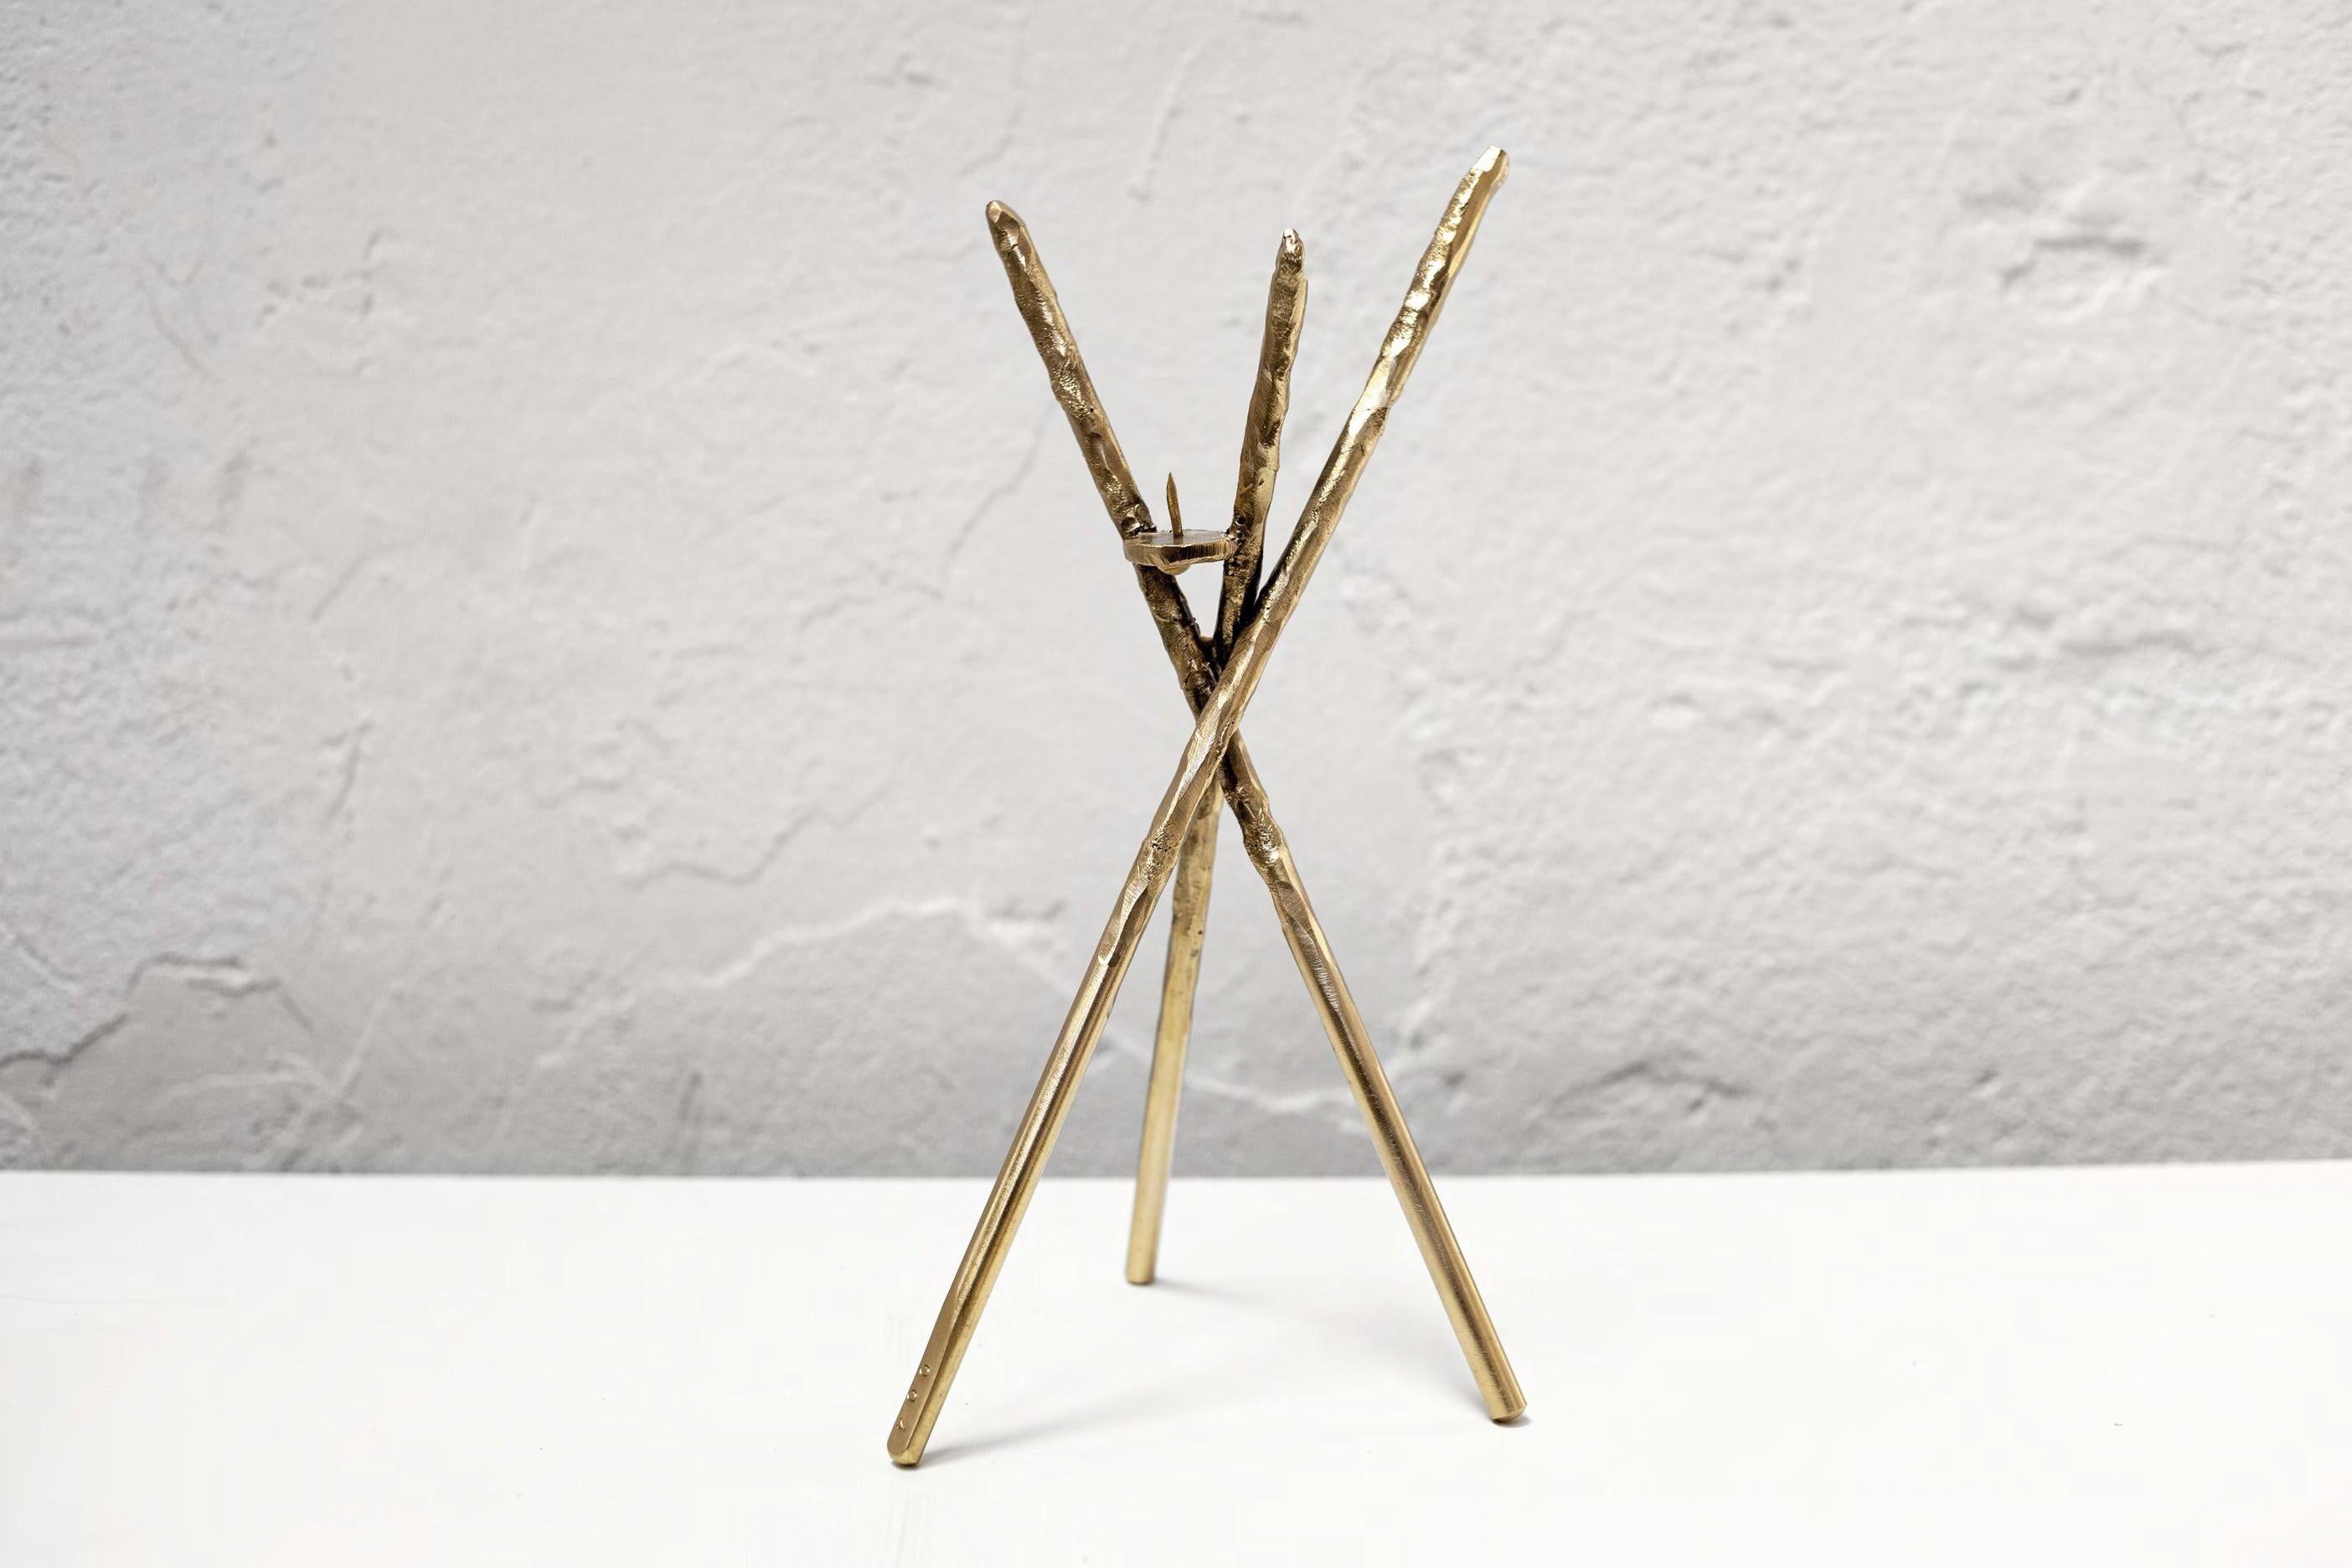 Prometeo brass candleholder by Morghen Studio
Dimensions: 12 x 12 x H 25 
Materials: Brass
Dimensions are customizable.  

Morghen is a multidisciplinary studio that works on the boundaries between design, art and craftsmanship. They rely on